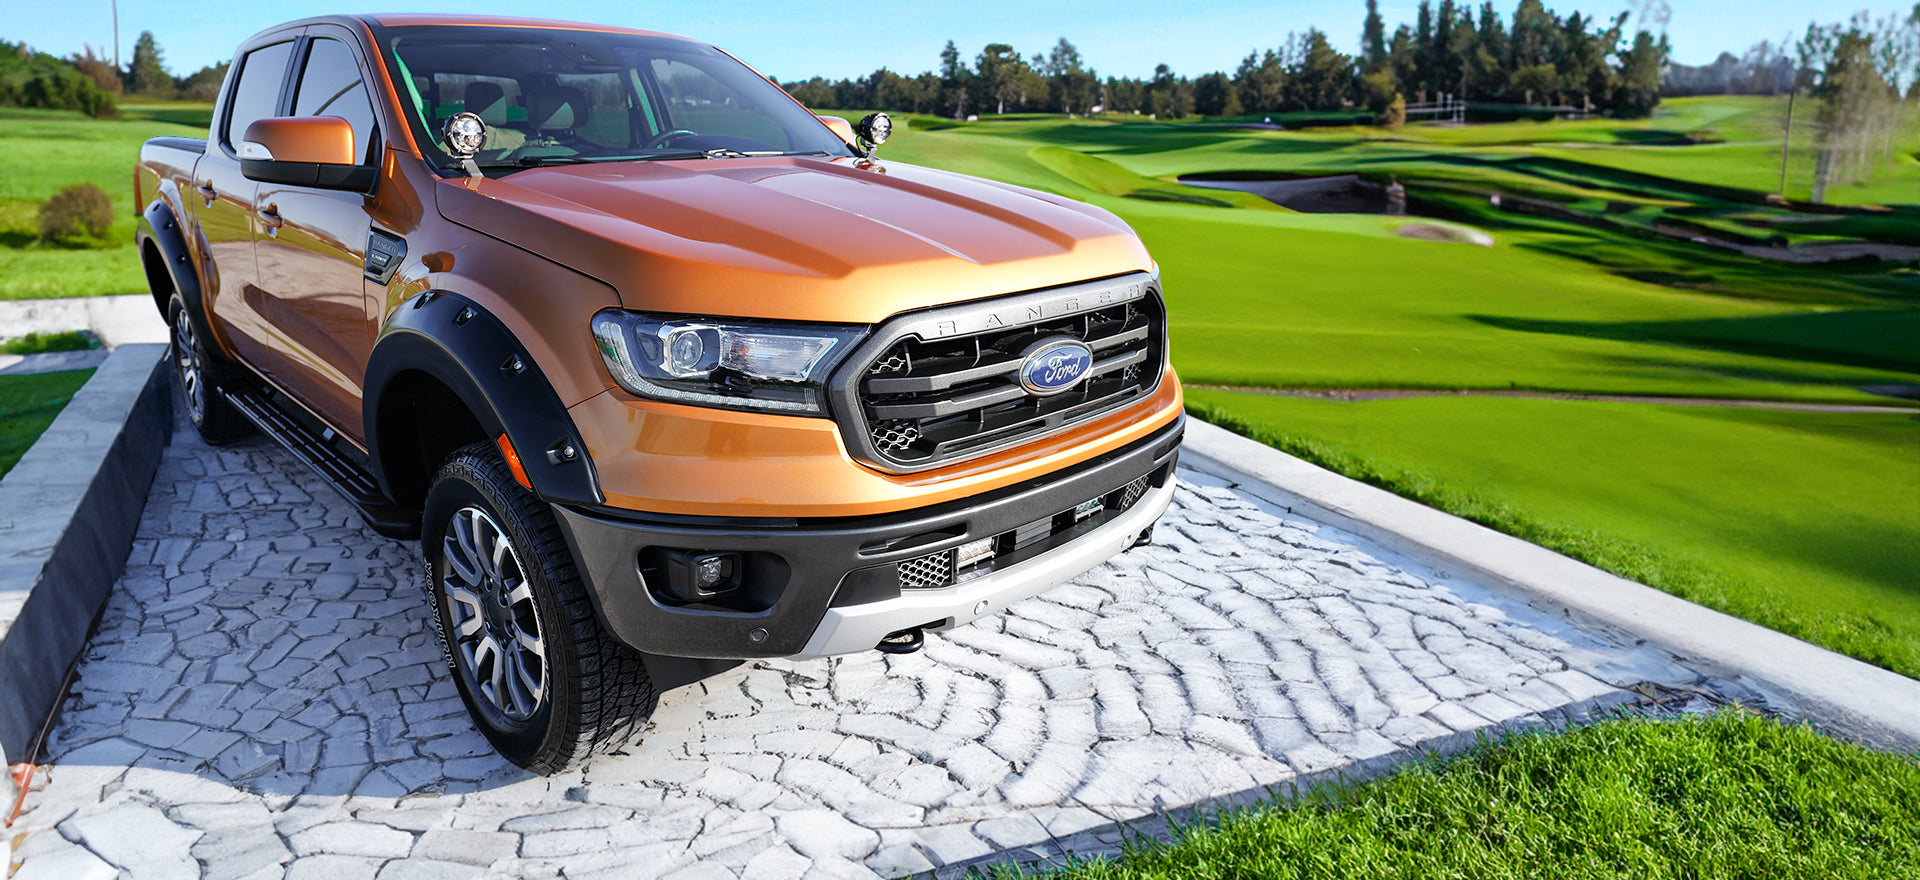 Ford South Africa Launches New Accessories and Options to Enhance the Ford  Ranger, South Africa